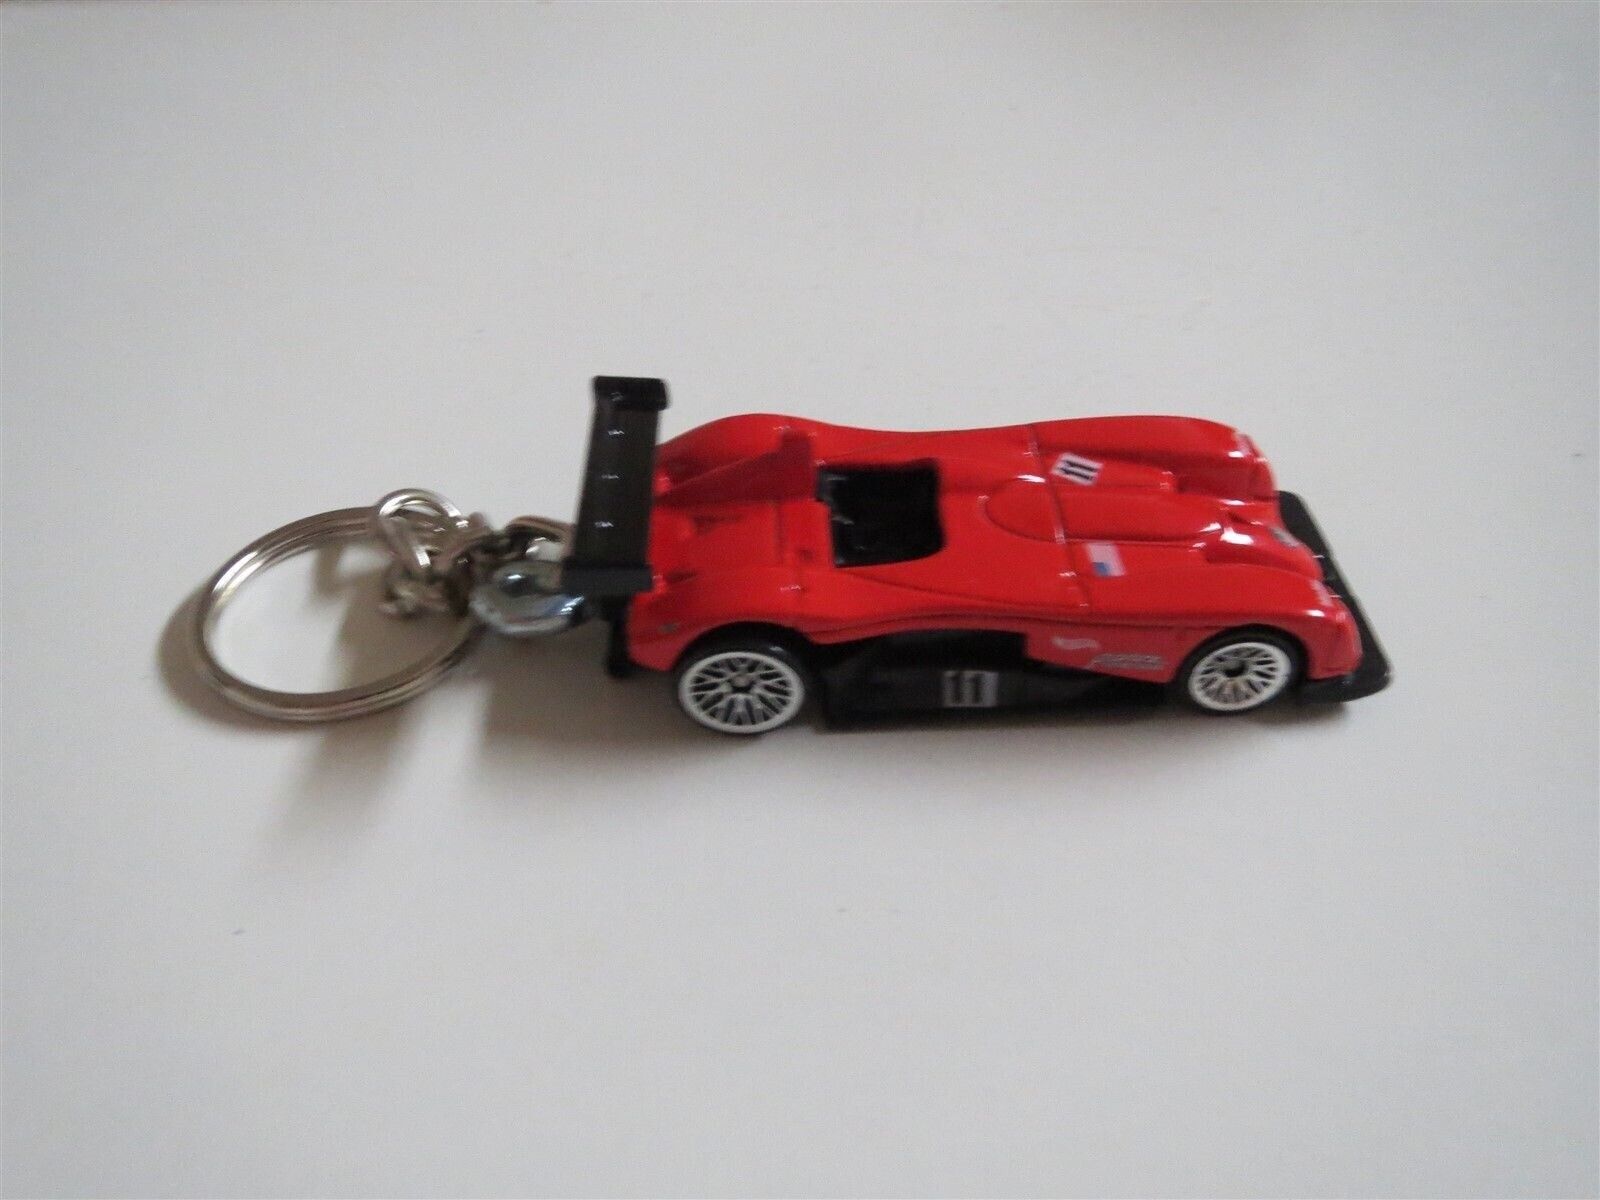 PANOZ LMP-1 ROADSTER S RACE CAR DIECAST MODEL TOY CAR KEYCHAIN KEYRING RED